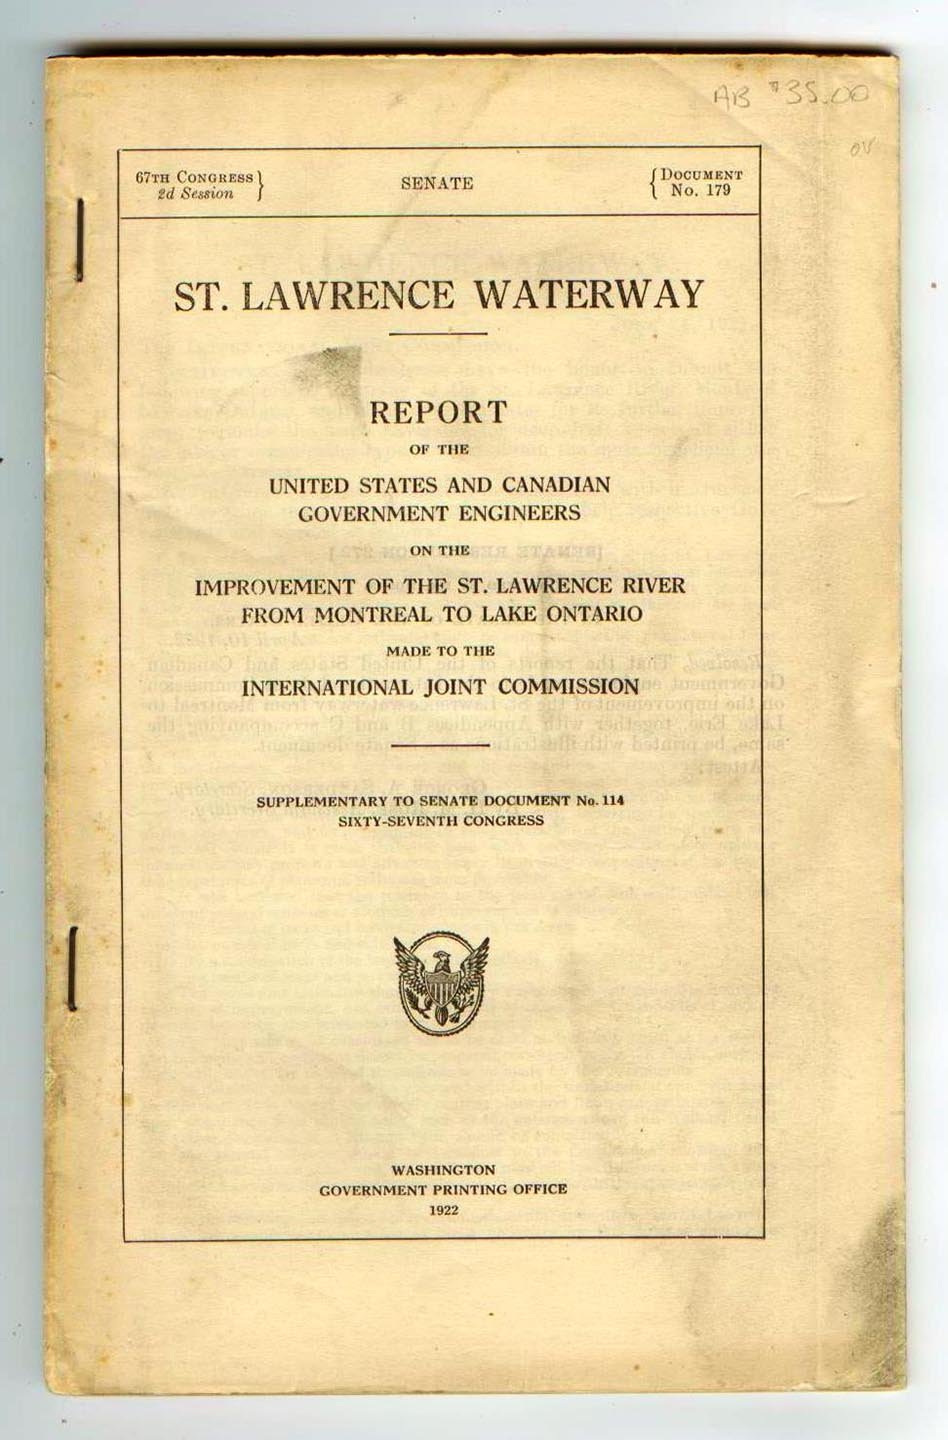 Report of the United States and Canadian Government Engineers on the Improvement of the St. Lawrence River From Montreal to Lake Ontario Made to the International Joint Commission